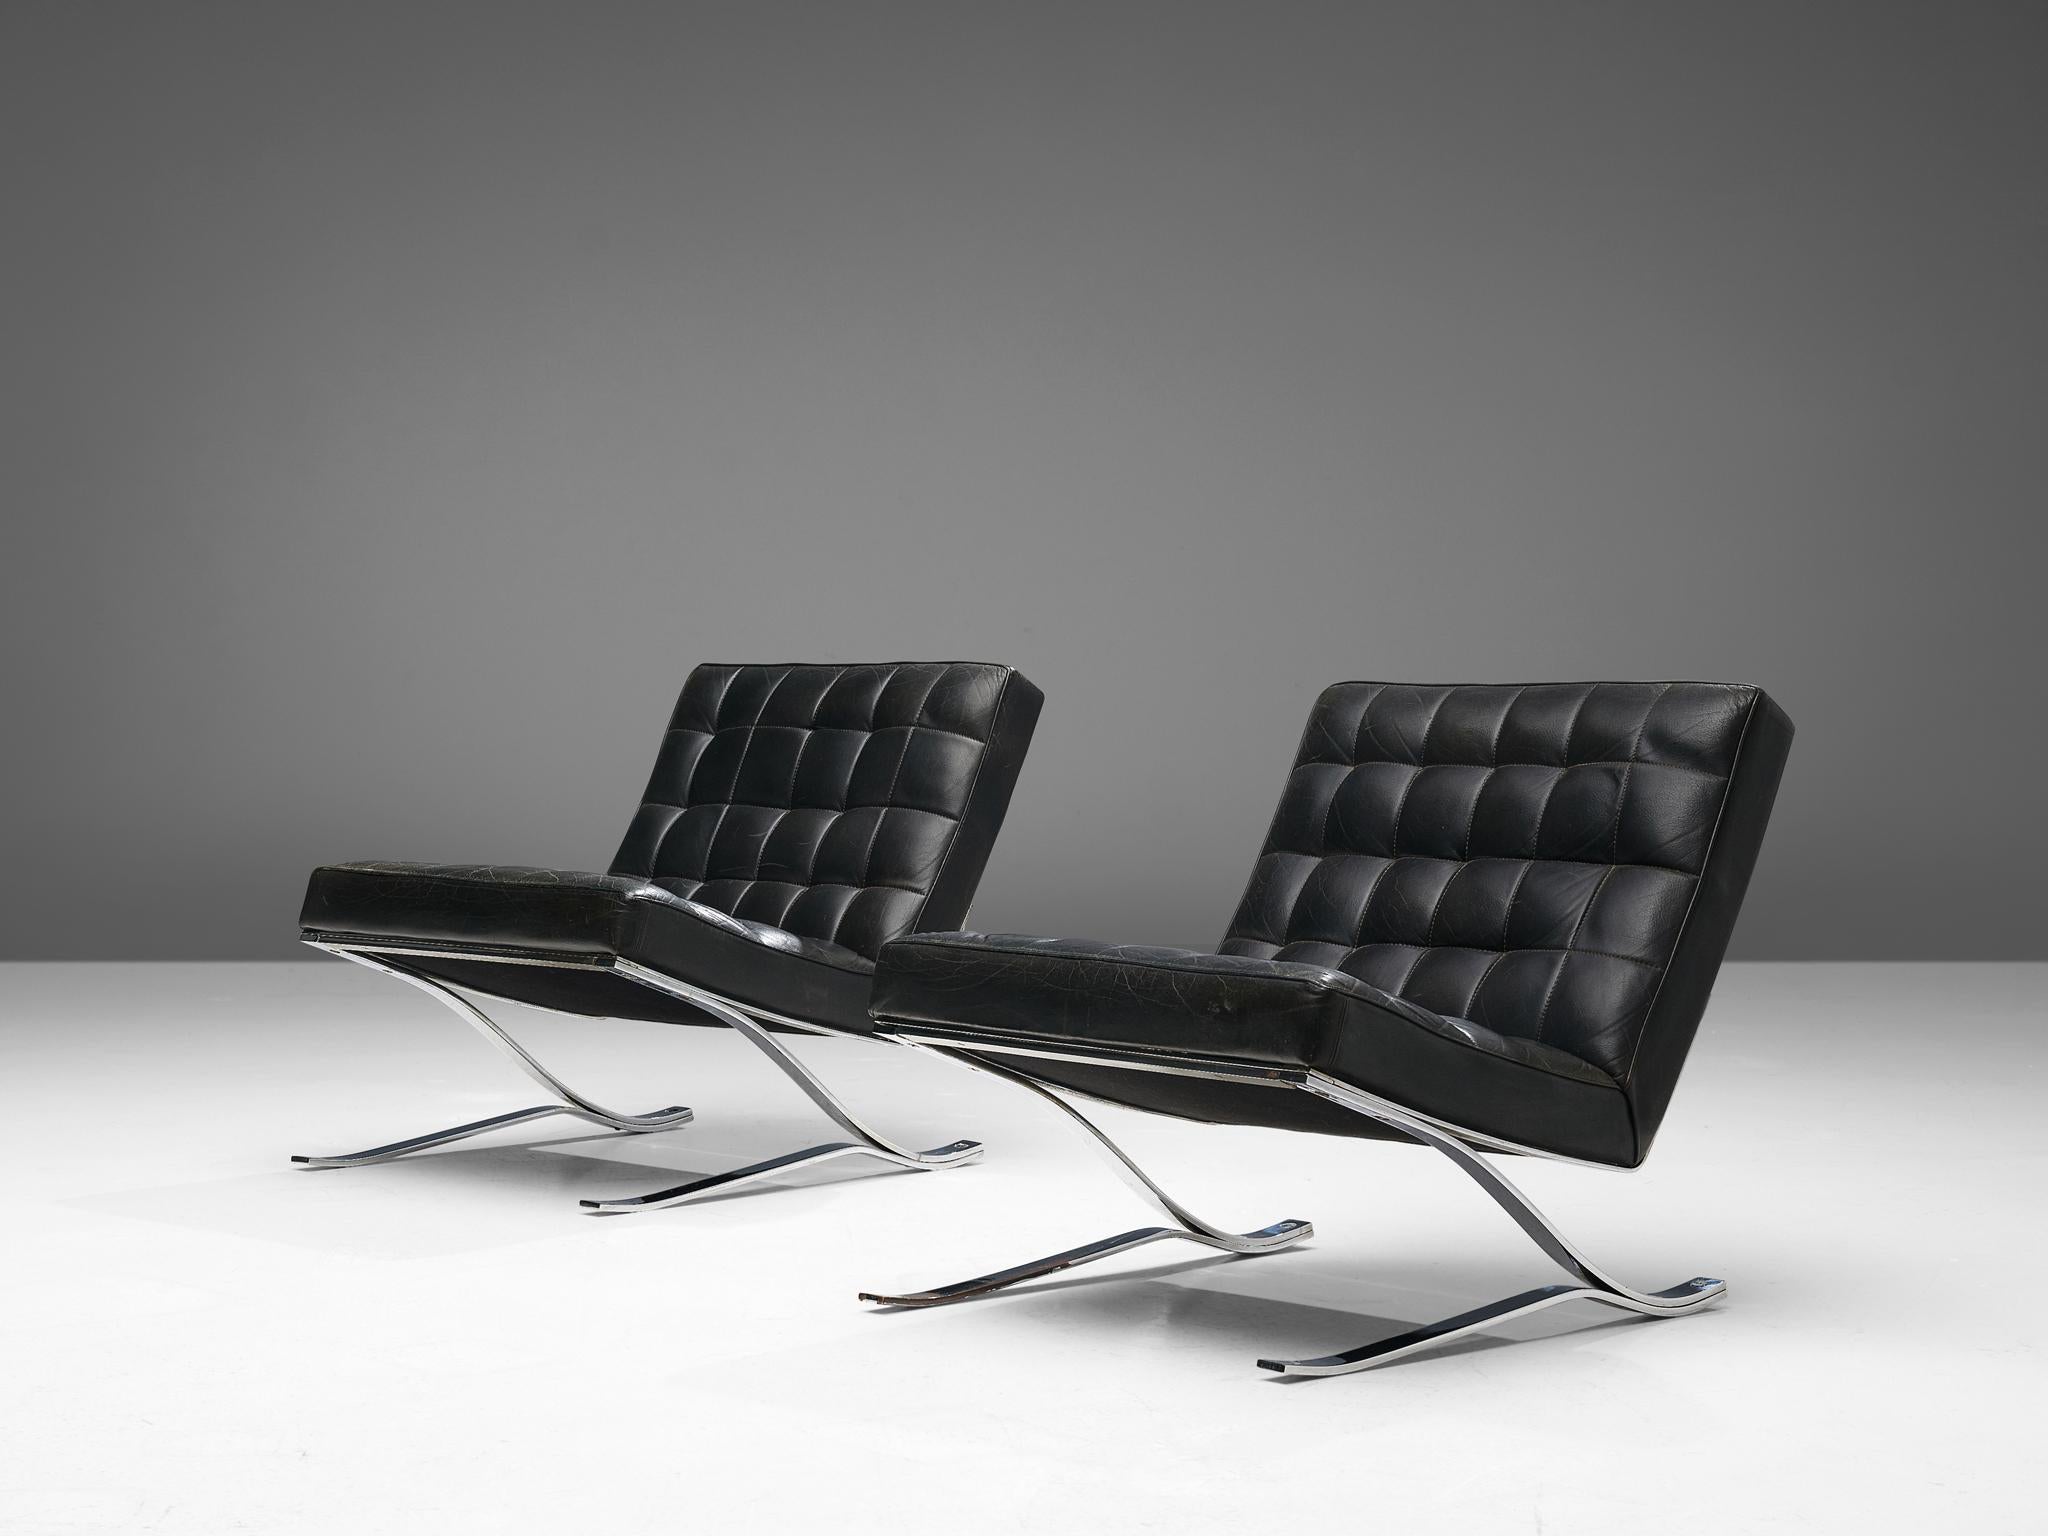 Rudolf Horn for Rölf Potsdam, cantilever lounge chair, leather, chrome-plated steel, Germany, design 1964 and manufactured in 1966

DDR-designer Rudolf Horn strongly admired the iconic ‘Barcelona chair’ designed by the renowned architect Ludwig Mies